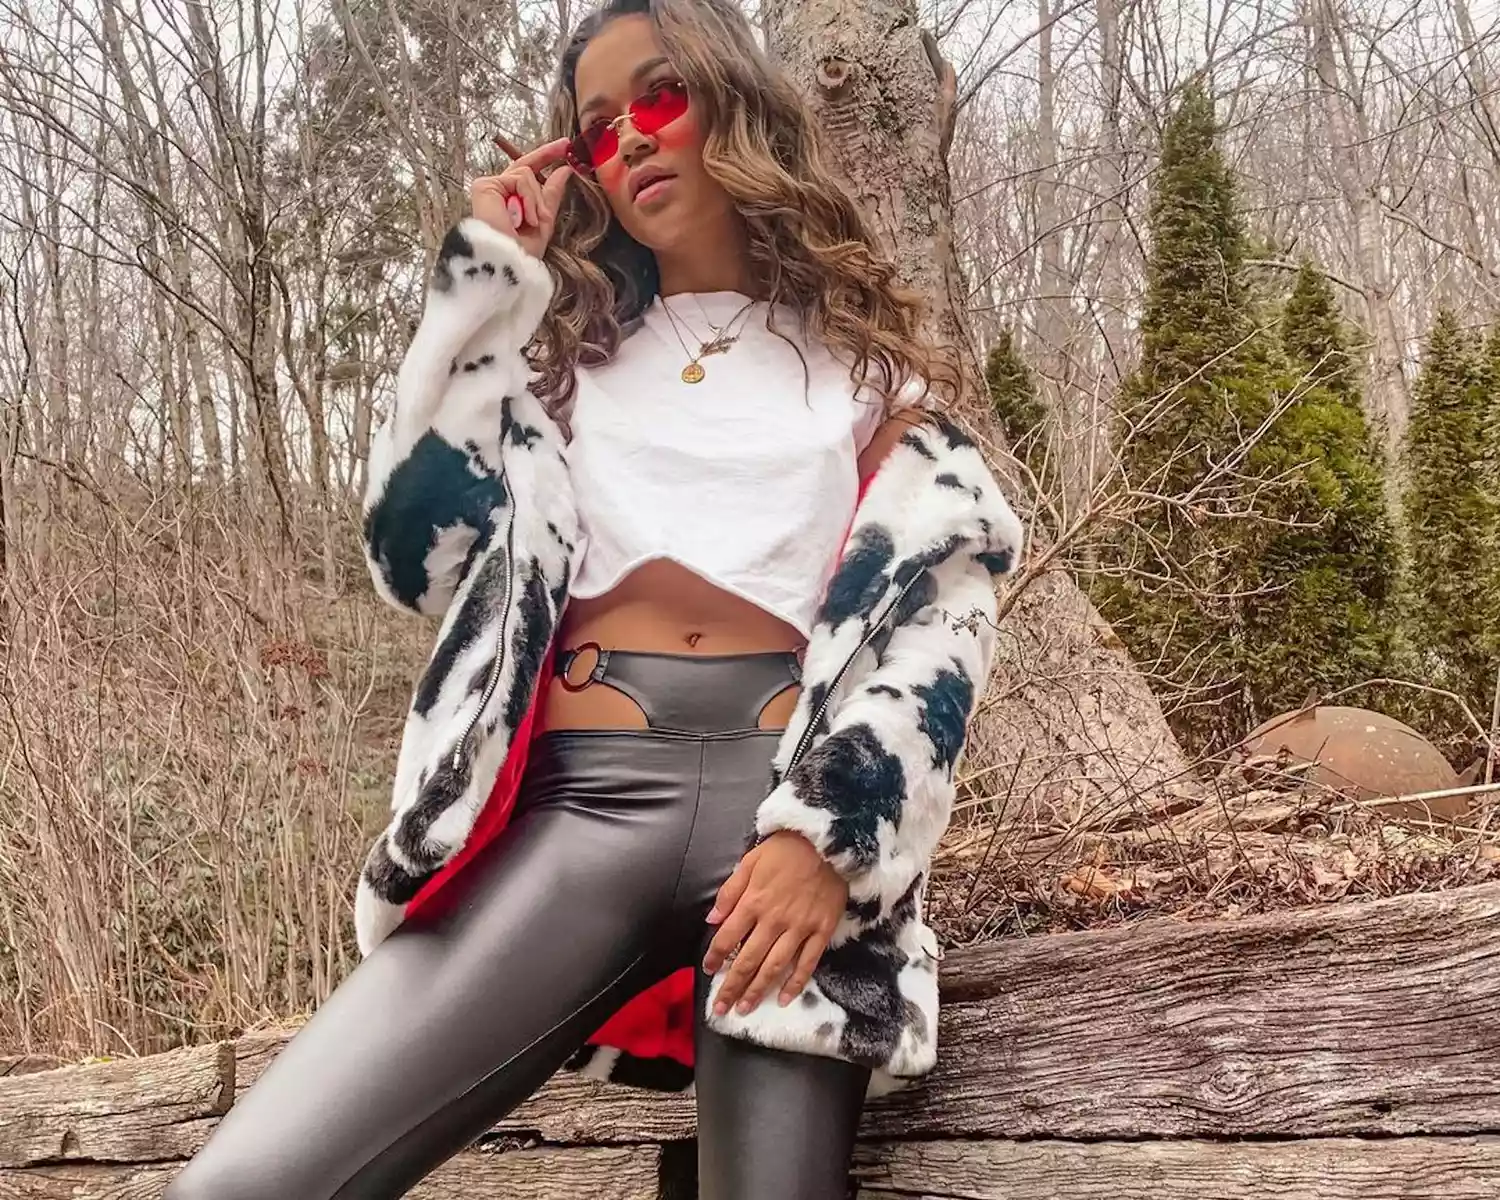 Madison Bailey wears a layered outfit with a white T-shirt, leather cutout pants, cow print faux fur jacket, and red sunglasses